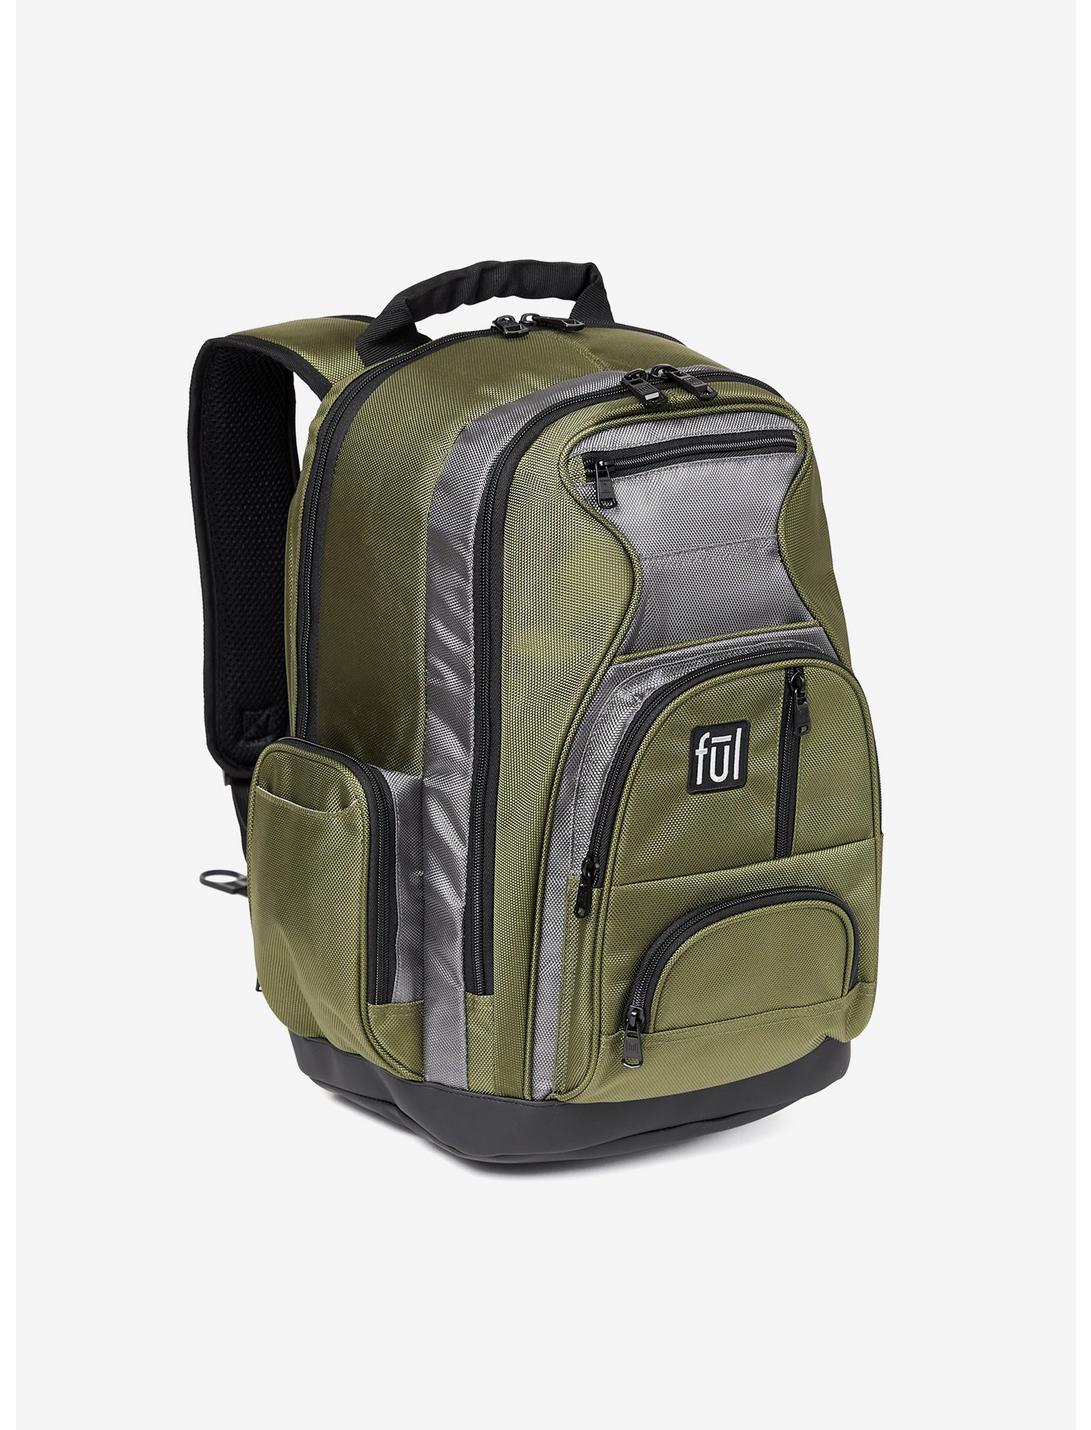 FUL Free Fallin' Padded Green Laptop Backpack, , hi-res